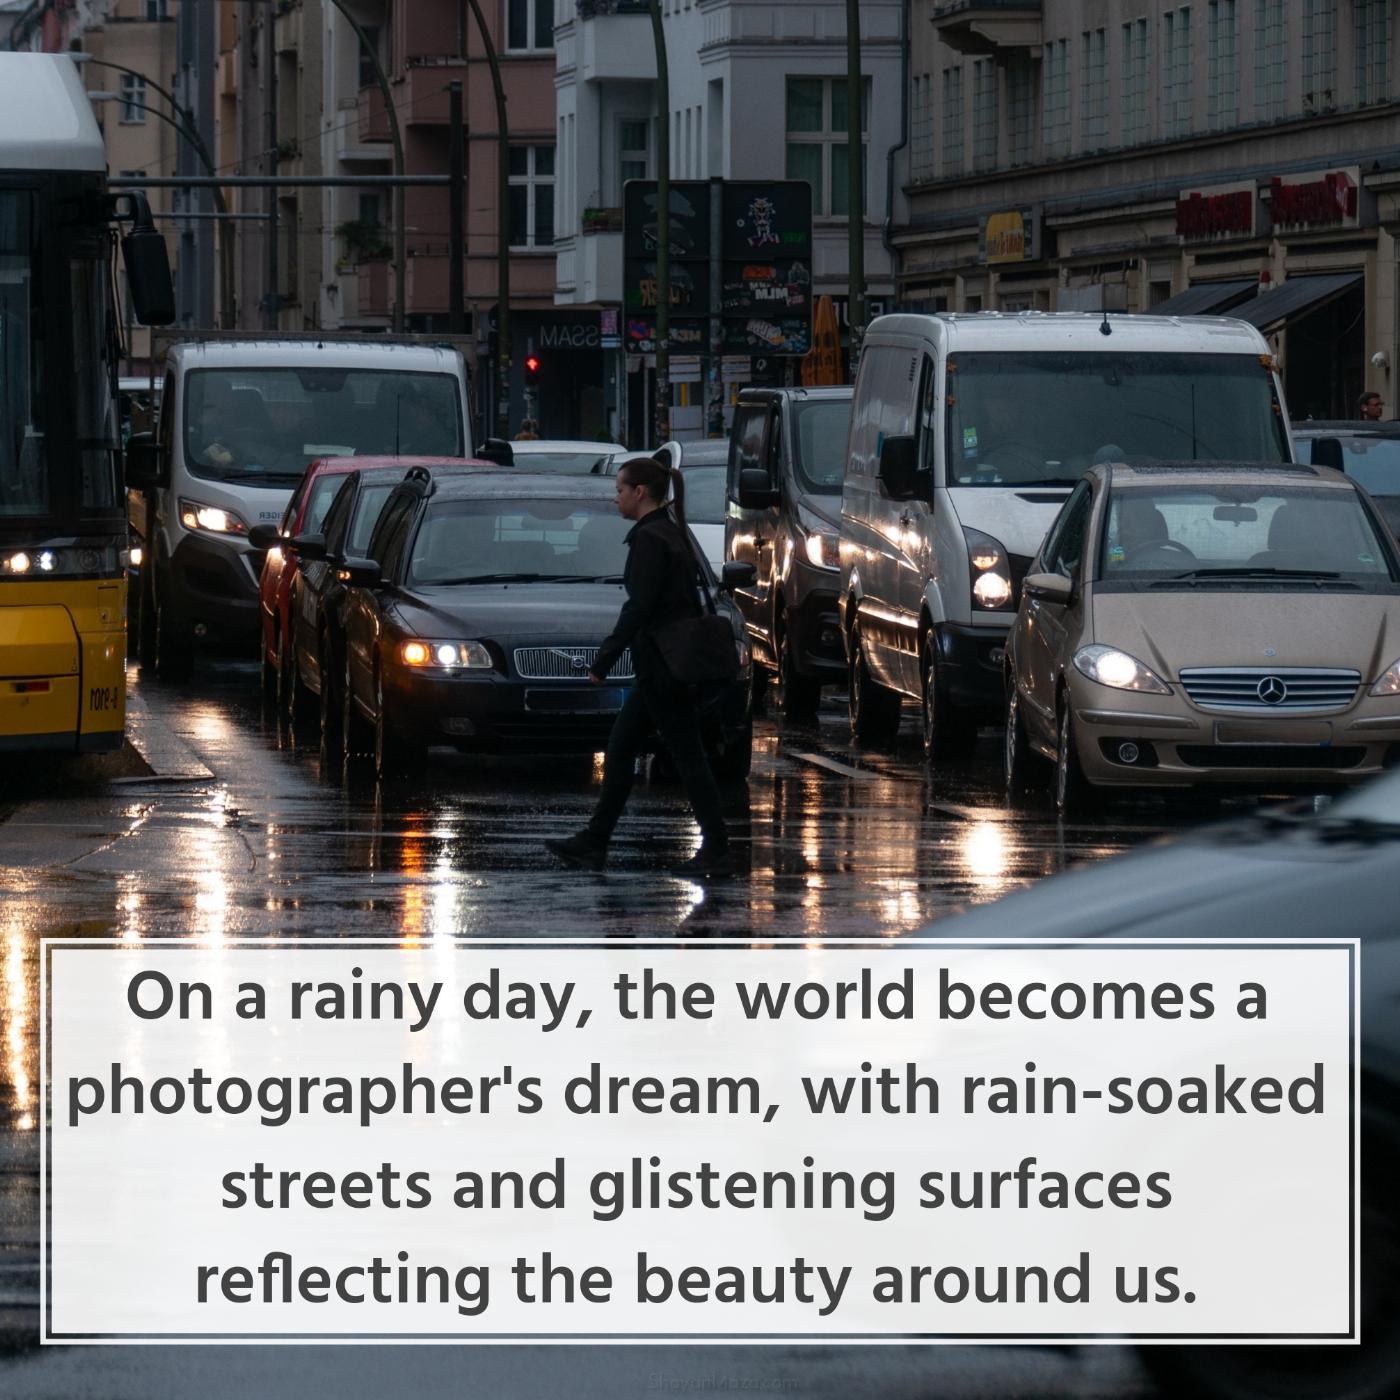 On a rainy day the world becomes a photographer's dream